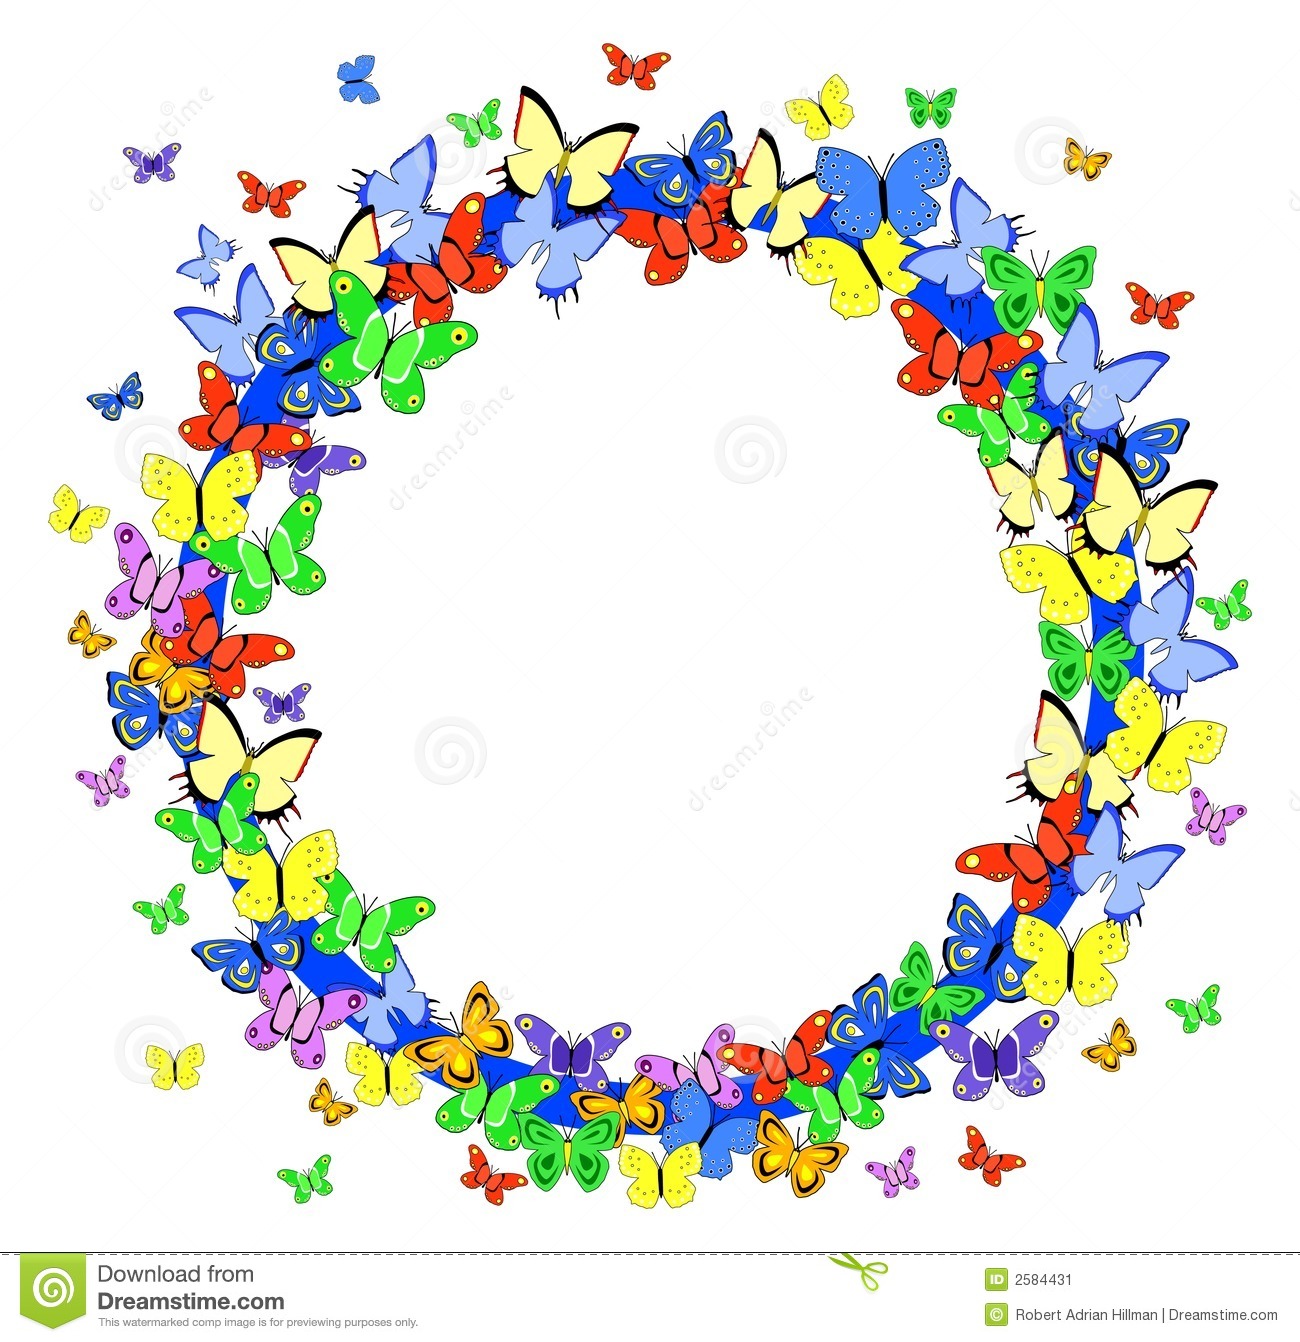 Clipart Flowers And Butterflies Border   Clipart Panda   Free Clipart